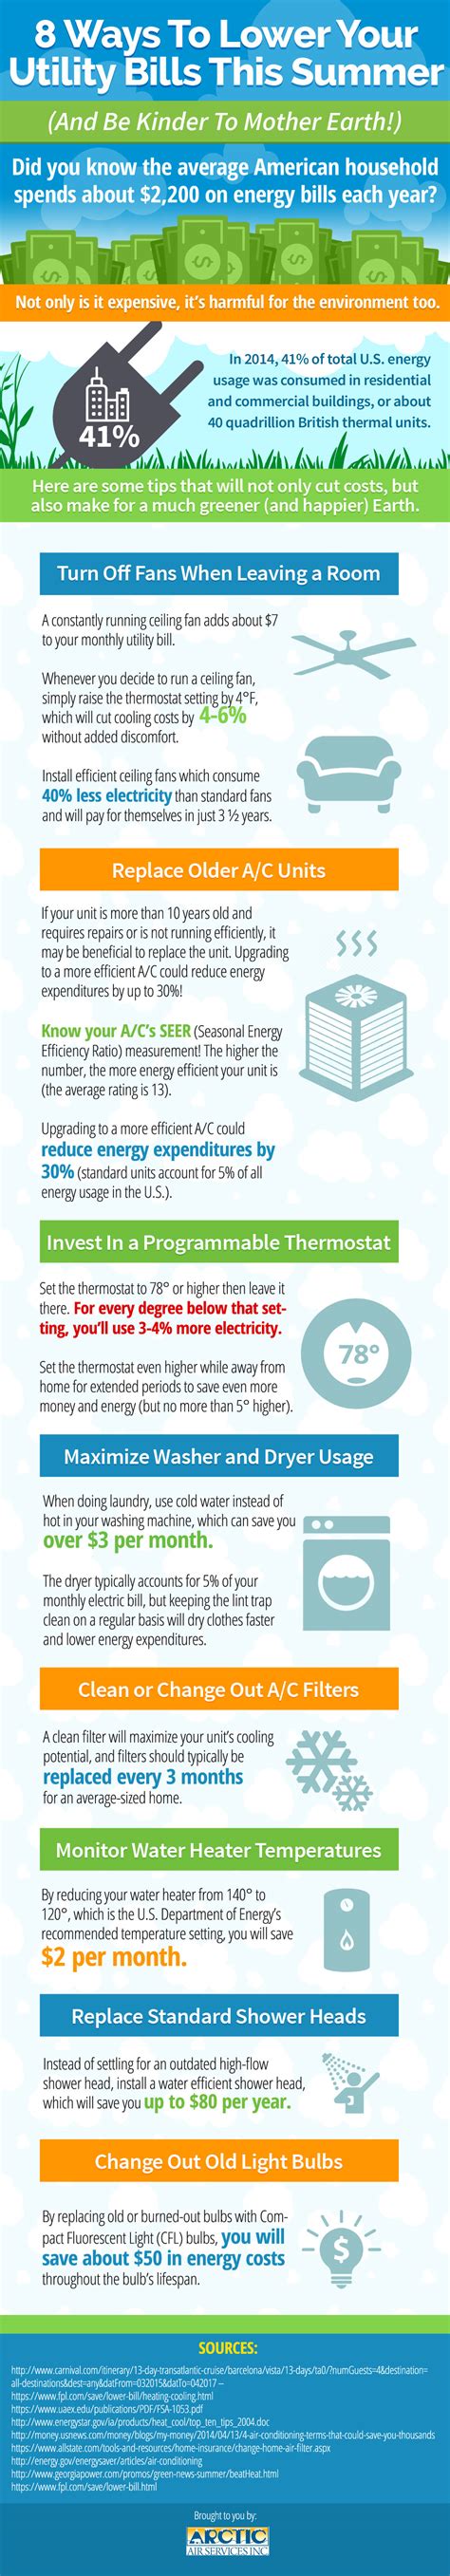 8 Ways To Lower Your Utility Bills This Summer Visually